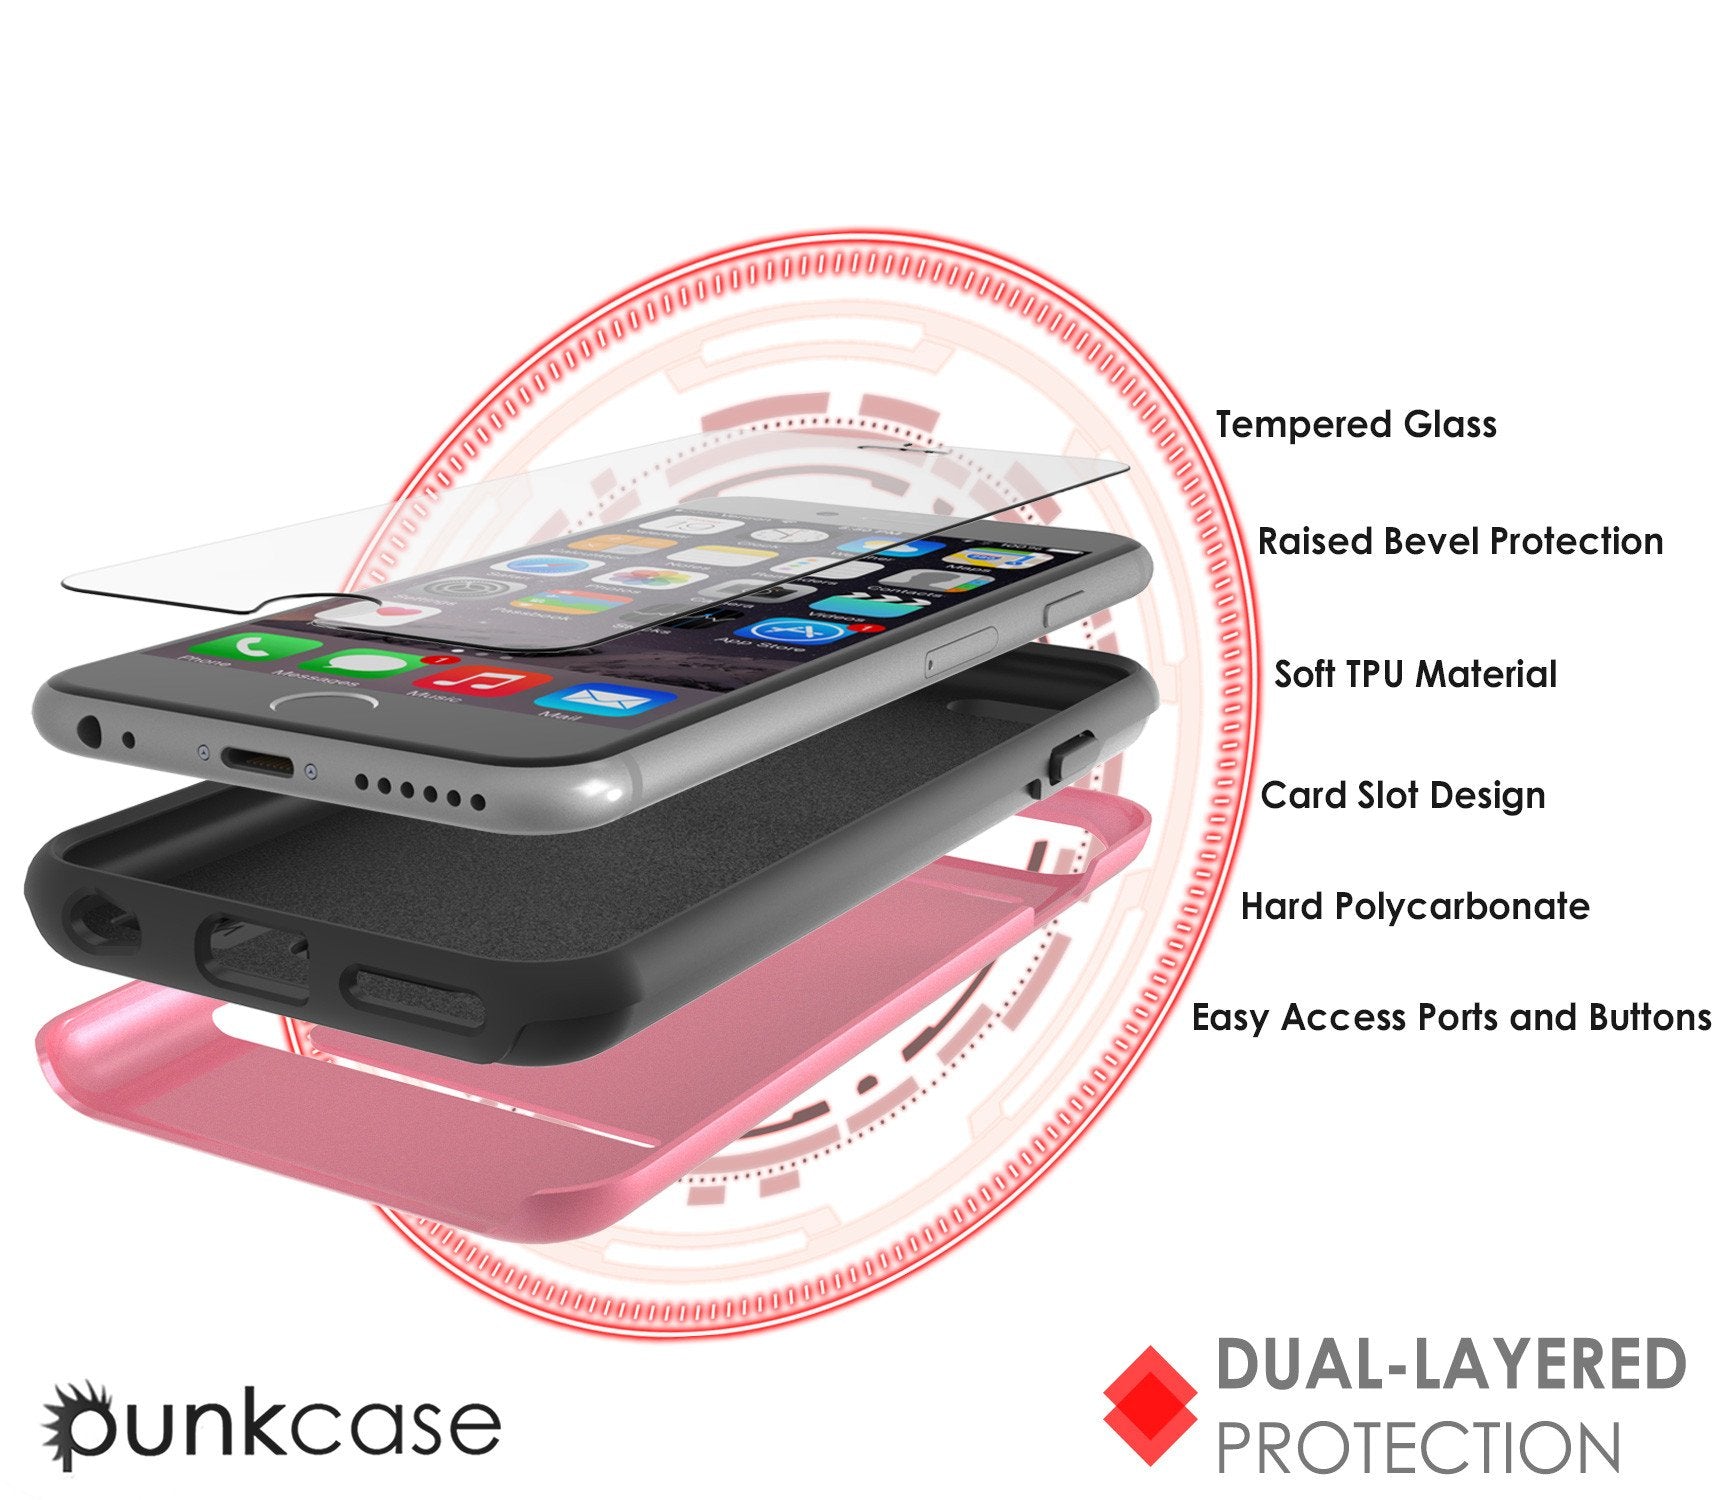 iPhone 6/6s Case PunkCase CLUTCH Pink Series Slim Armor Soft Cover Case w/ Tempered Glass